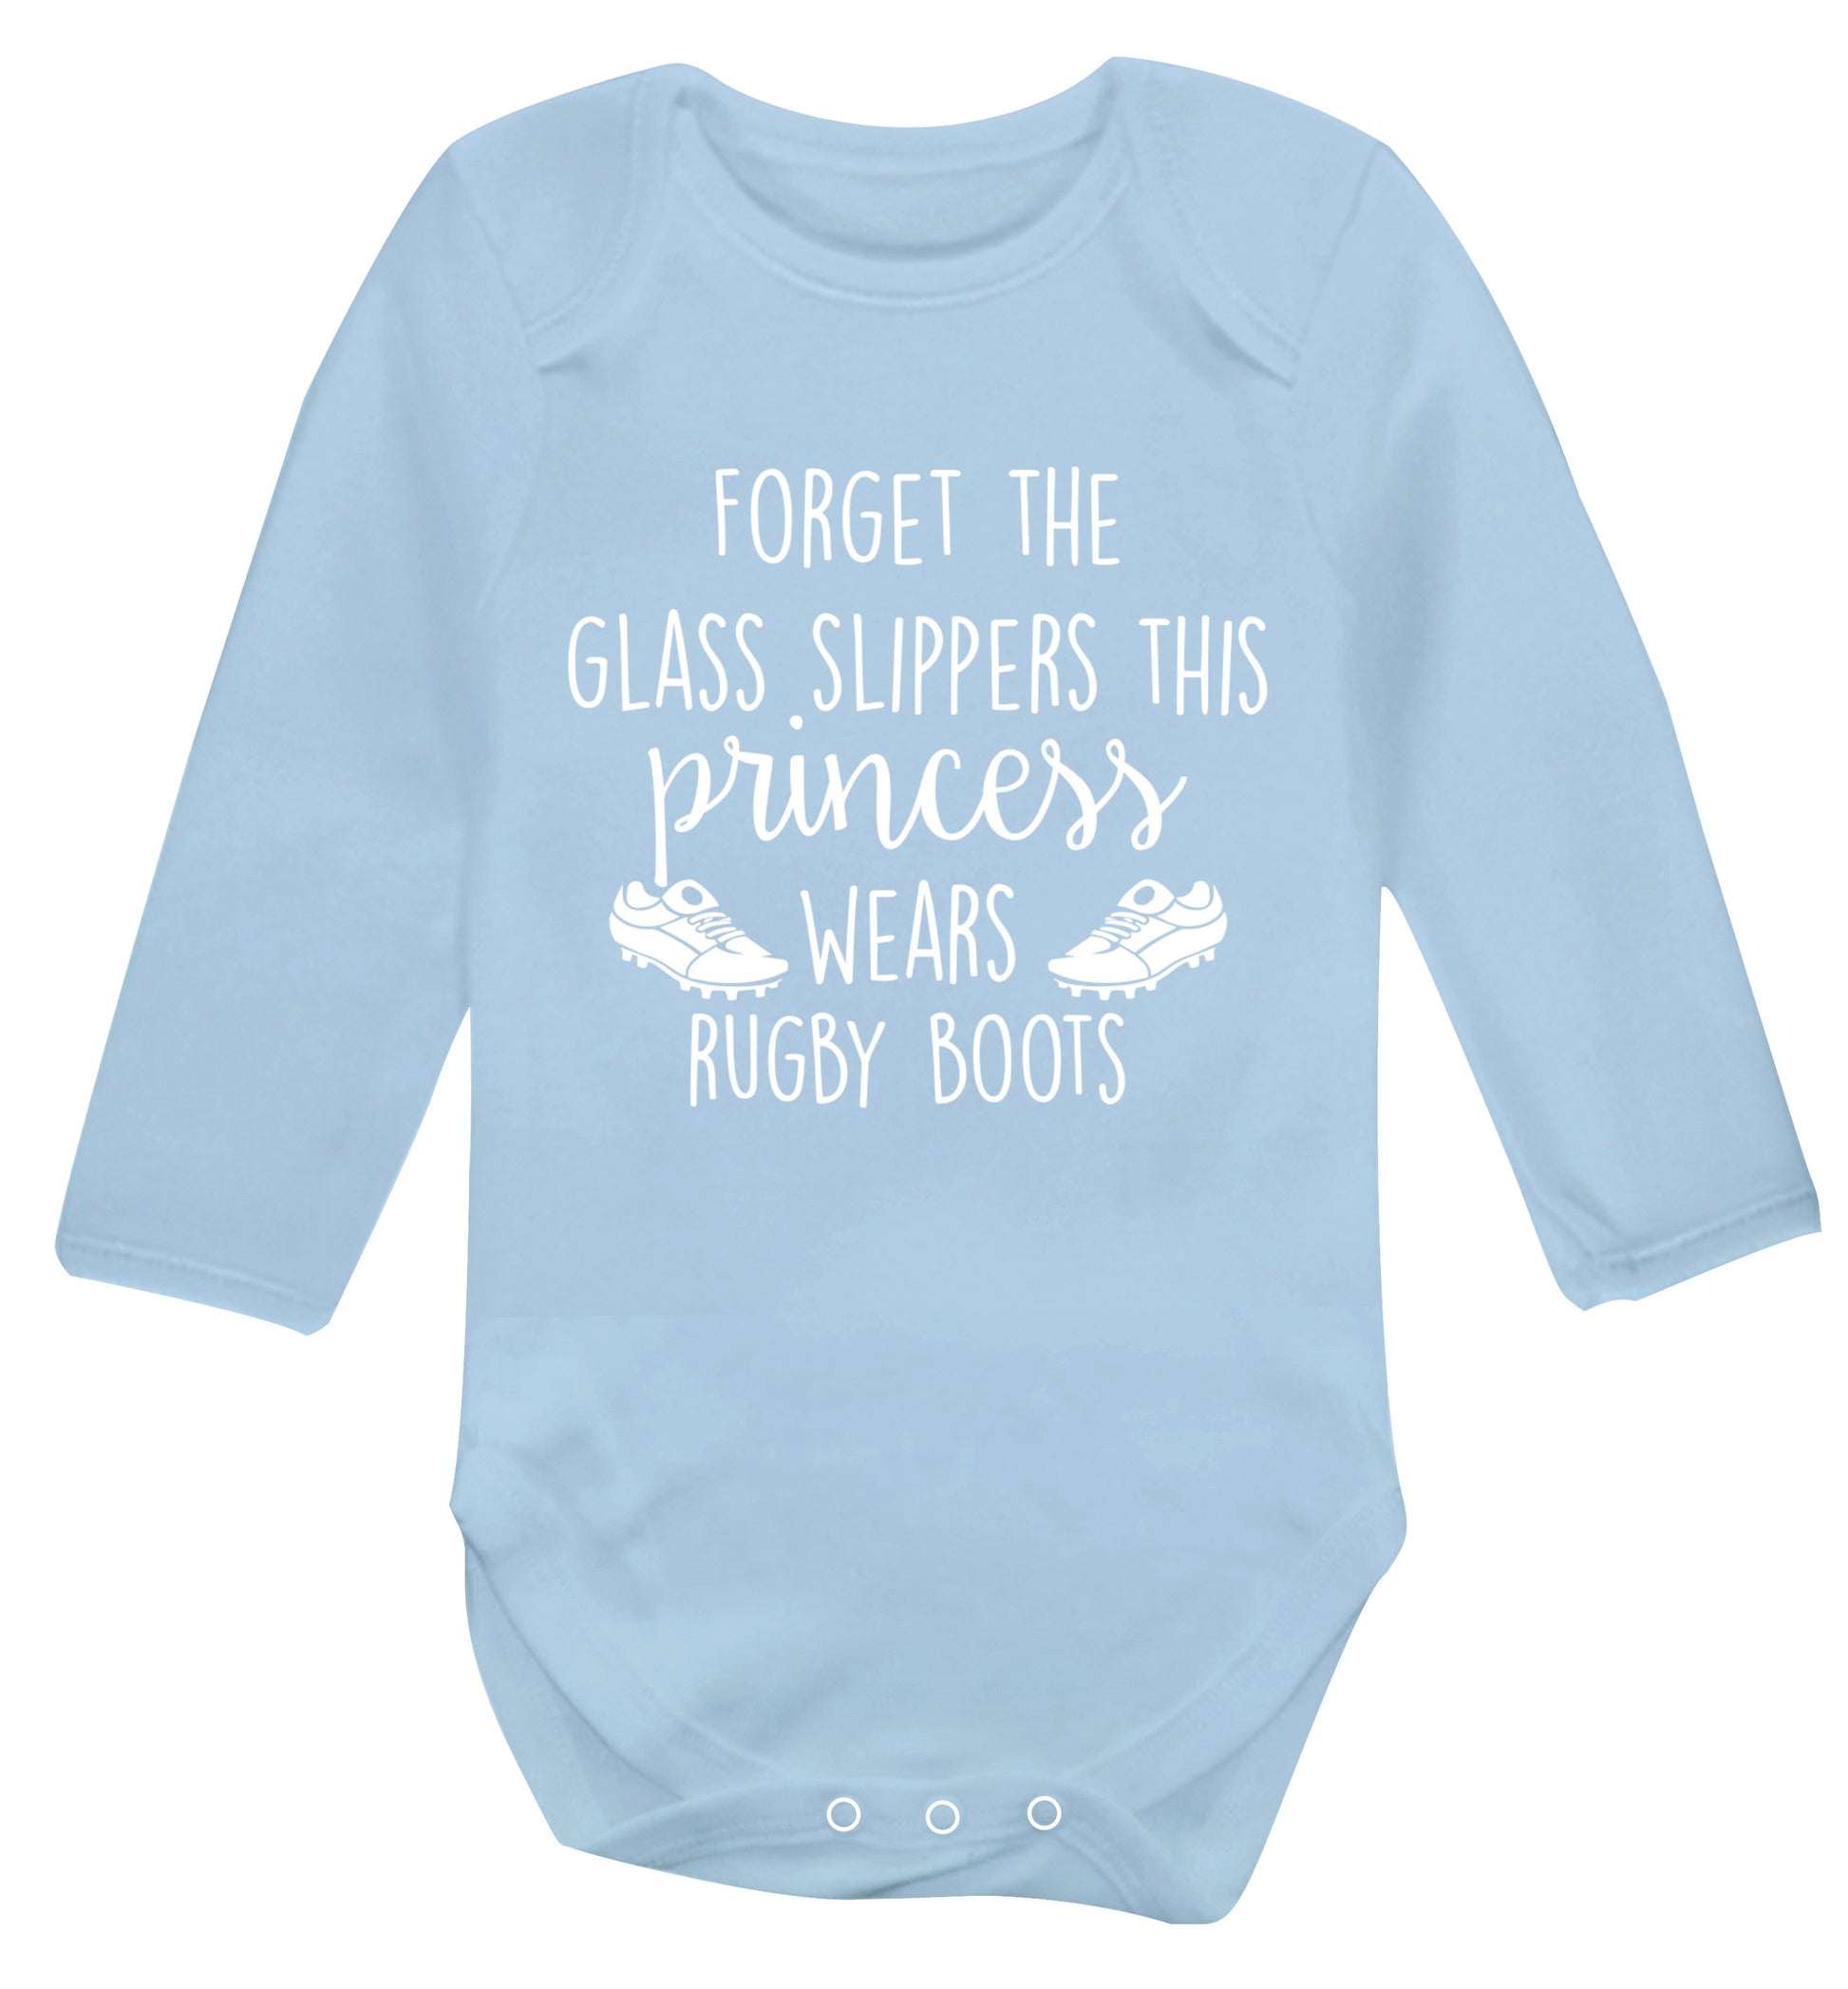 Forget the glass slippers this princess wears rugby boots Baby Vest long sleeved pale blue 6-12 months